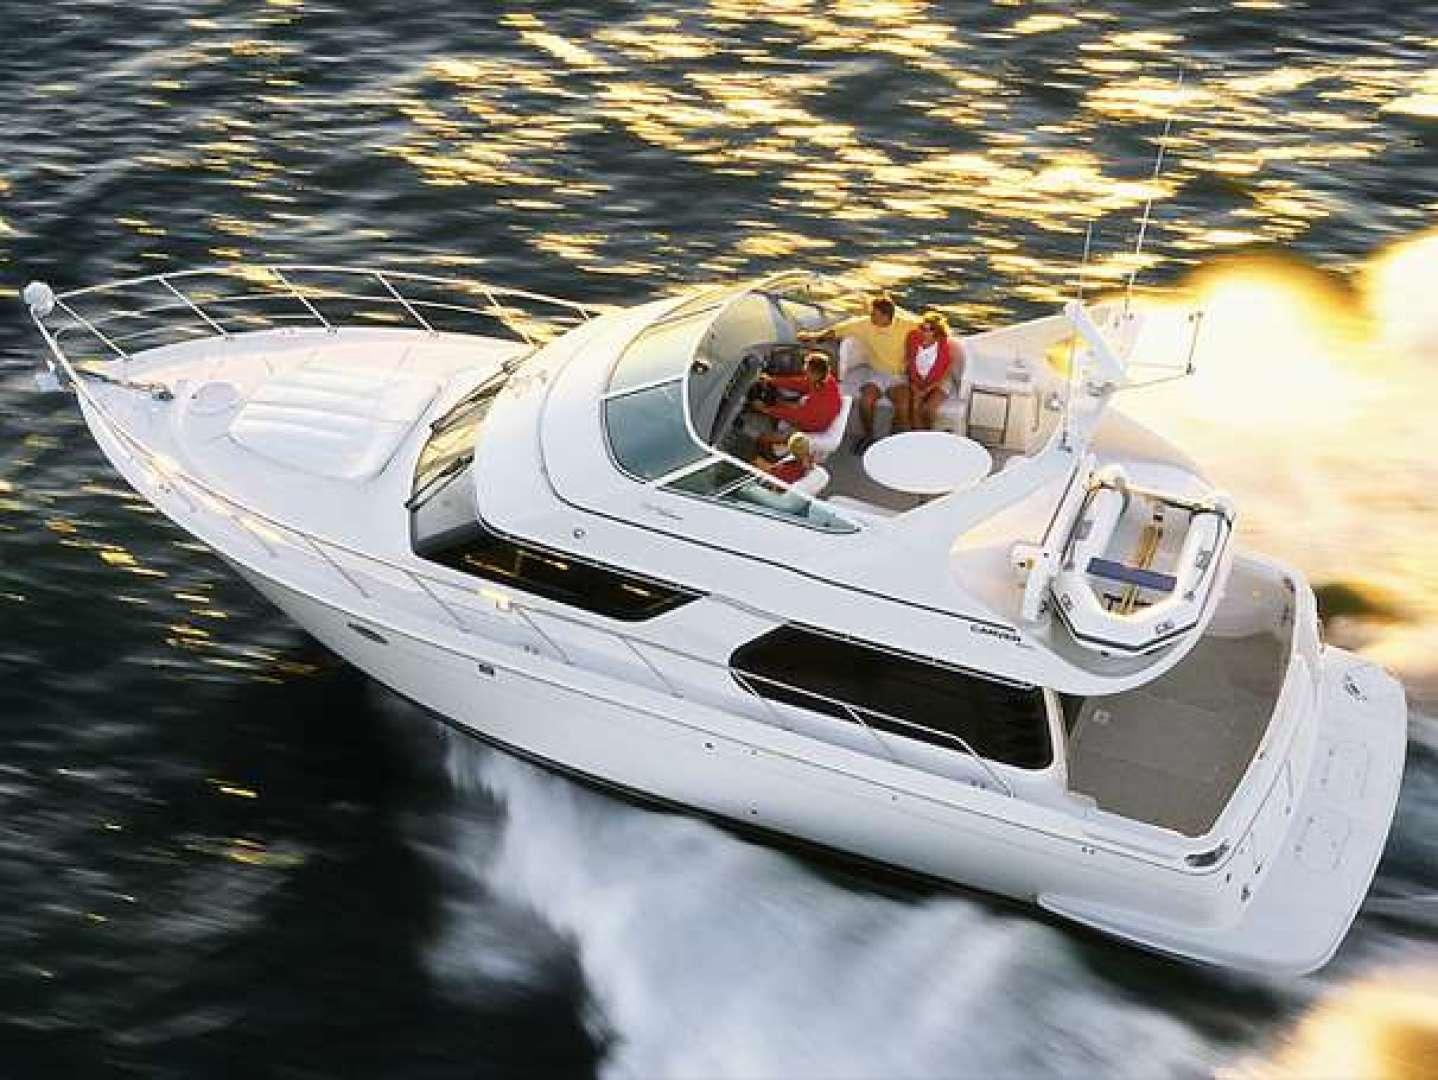 45' Carver 450 Voyager Pilothouse